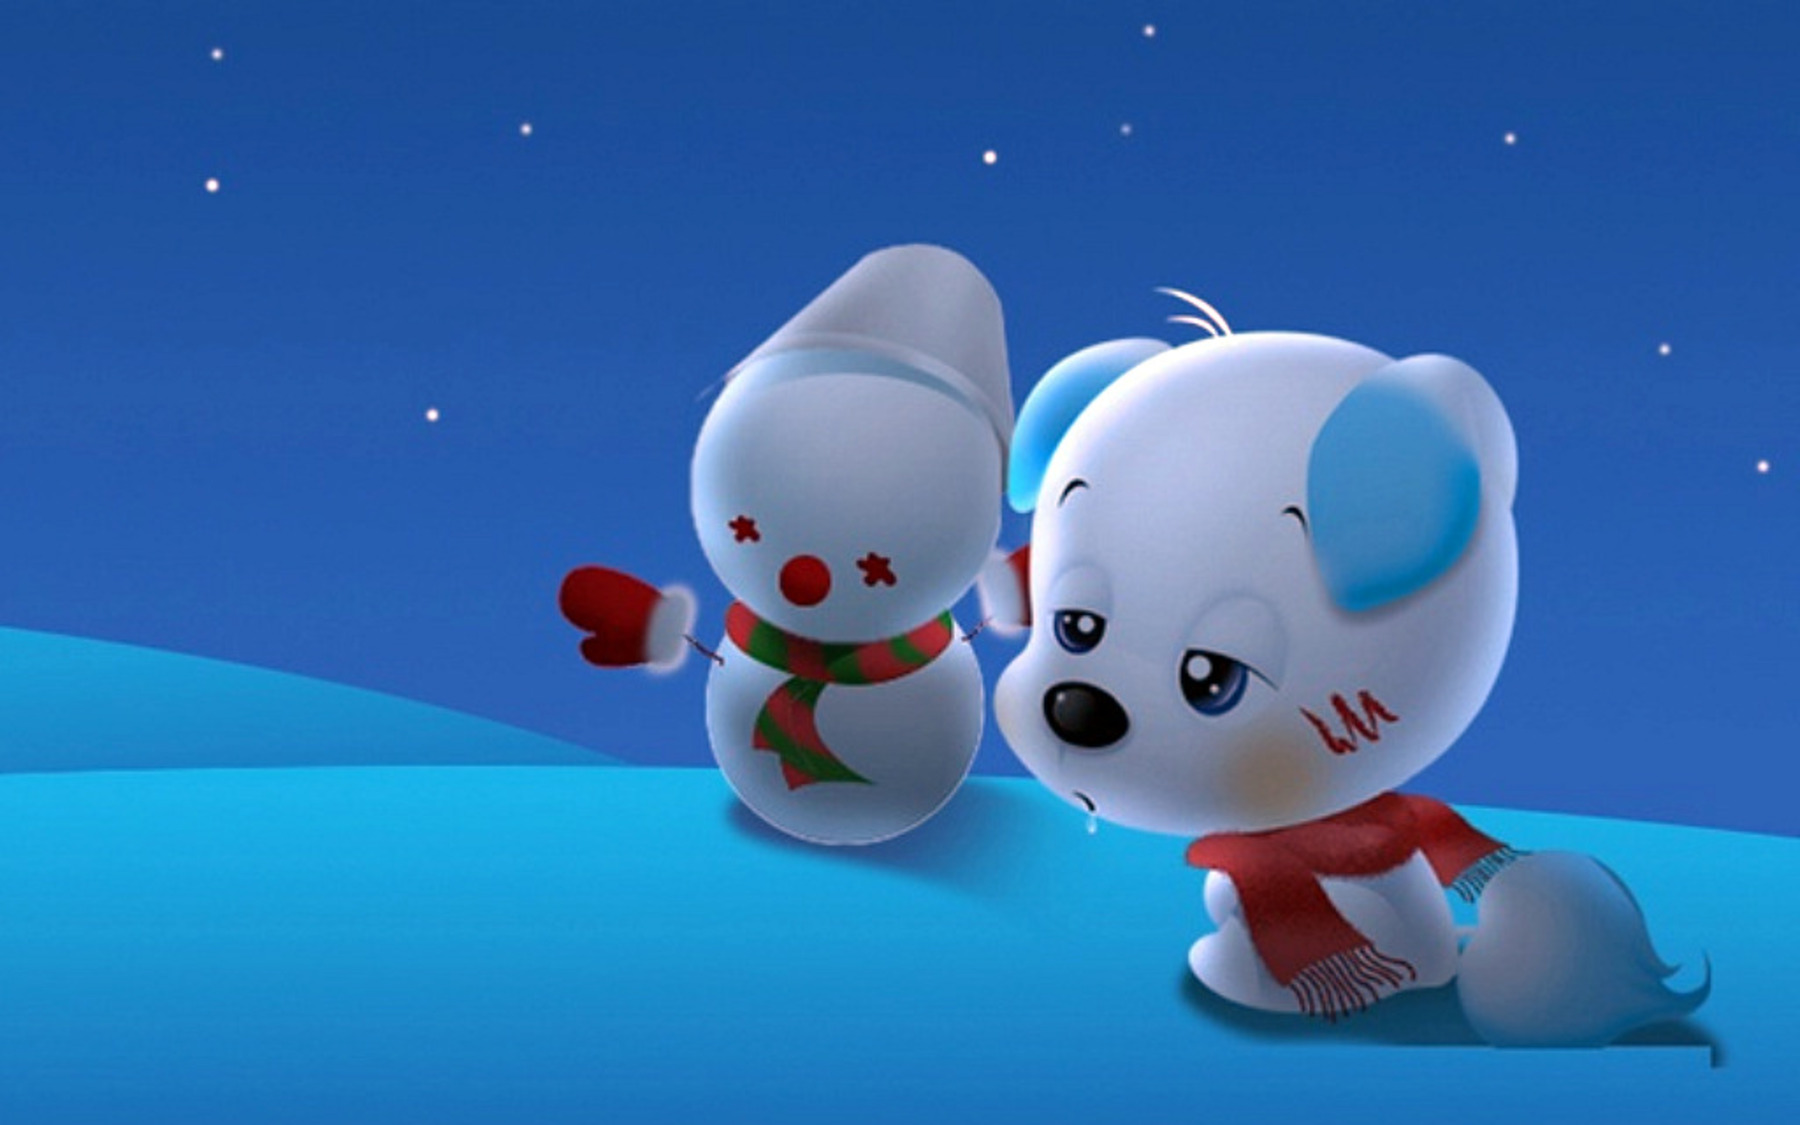 Free download Cute Cartoon Puppy Wallpaper 1800x1125 226452 [1800x1125] for your Desktop, Mobile & Tablet. Explore Cute Animated Wallpaper. Cute Winter Wallpaper, Kawaii Anime Wallpaper, Super Cute Desktop Wallpaper